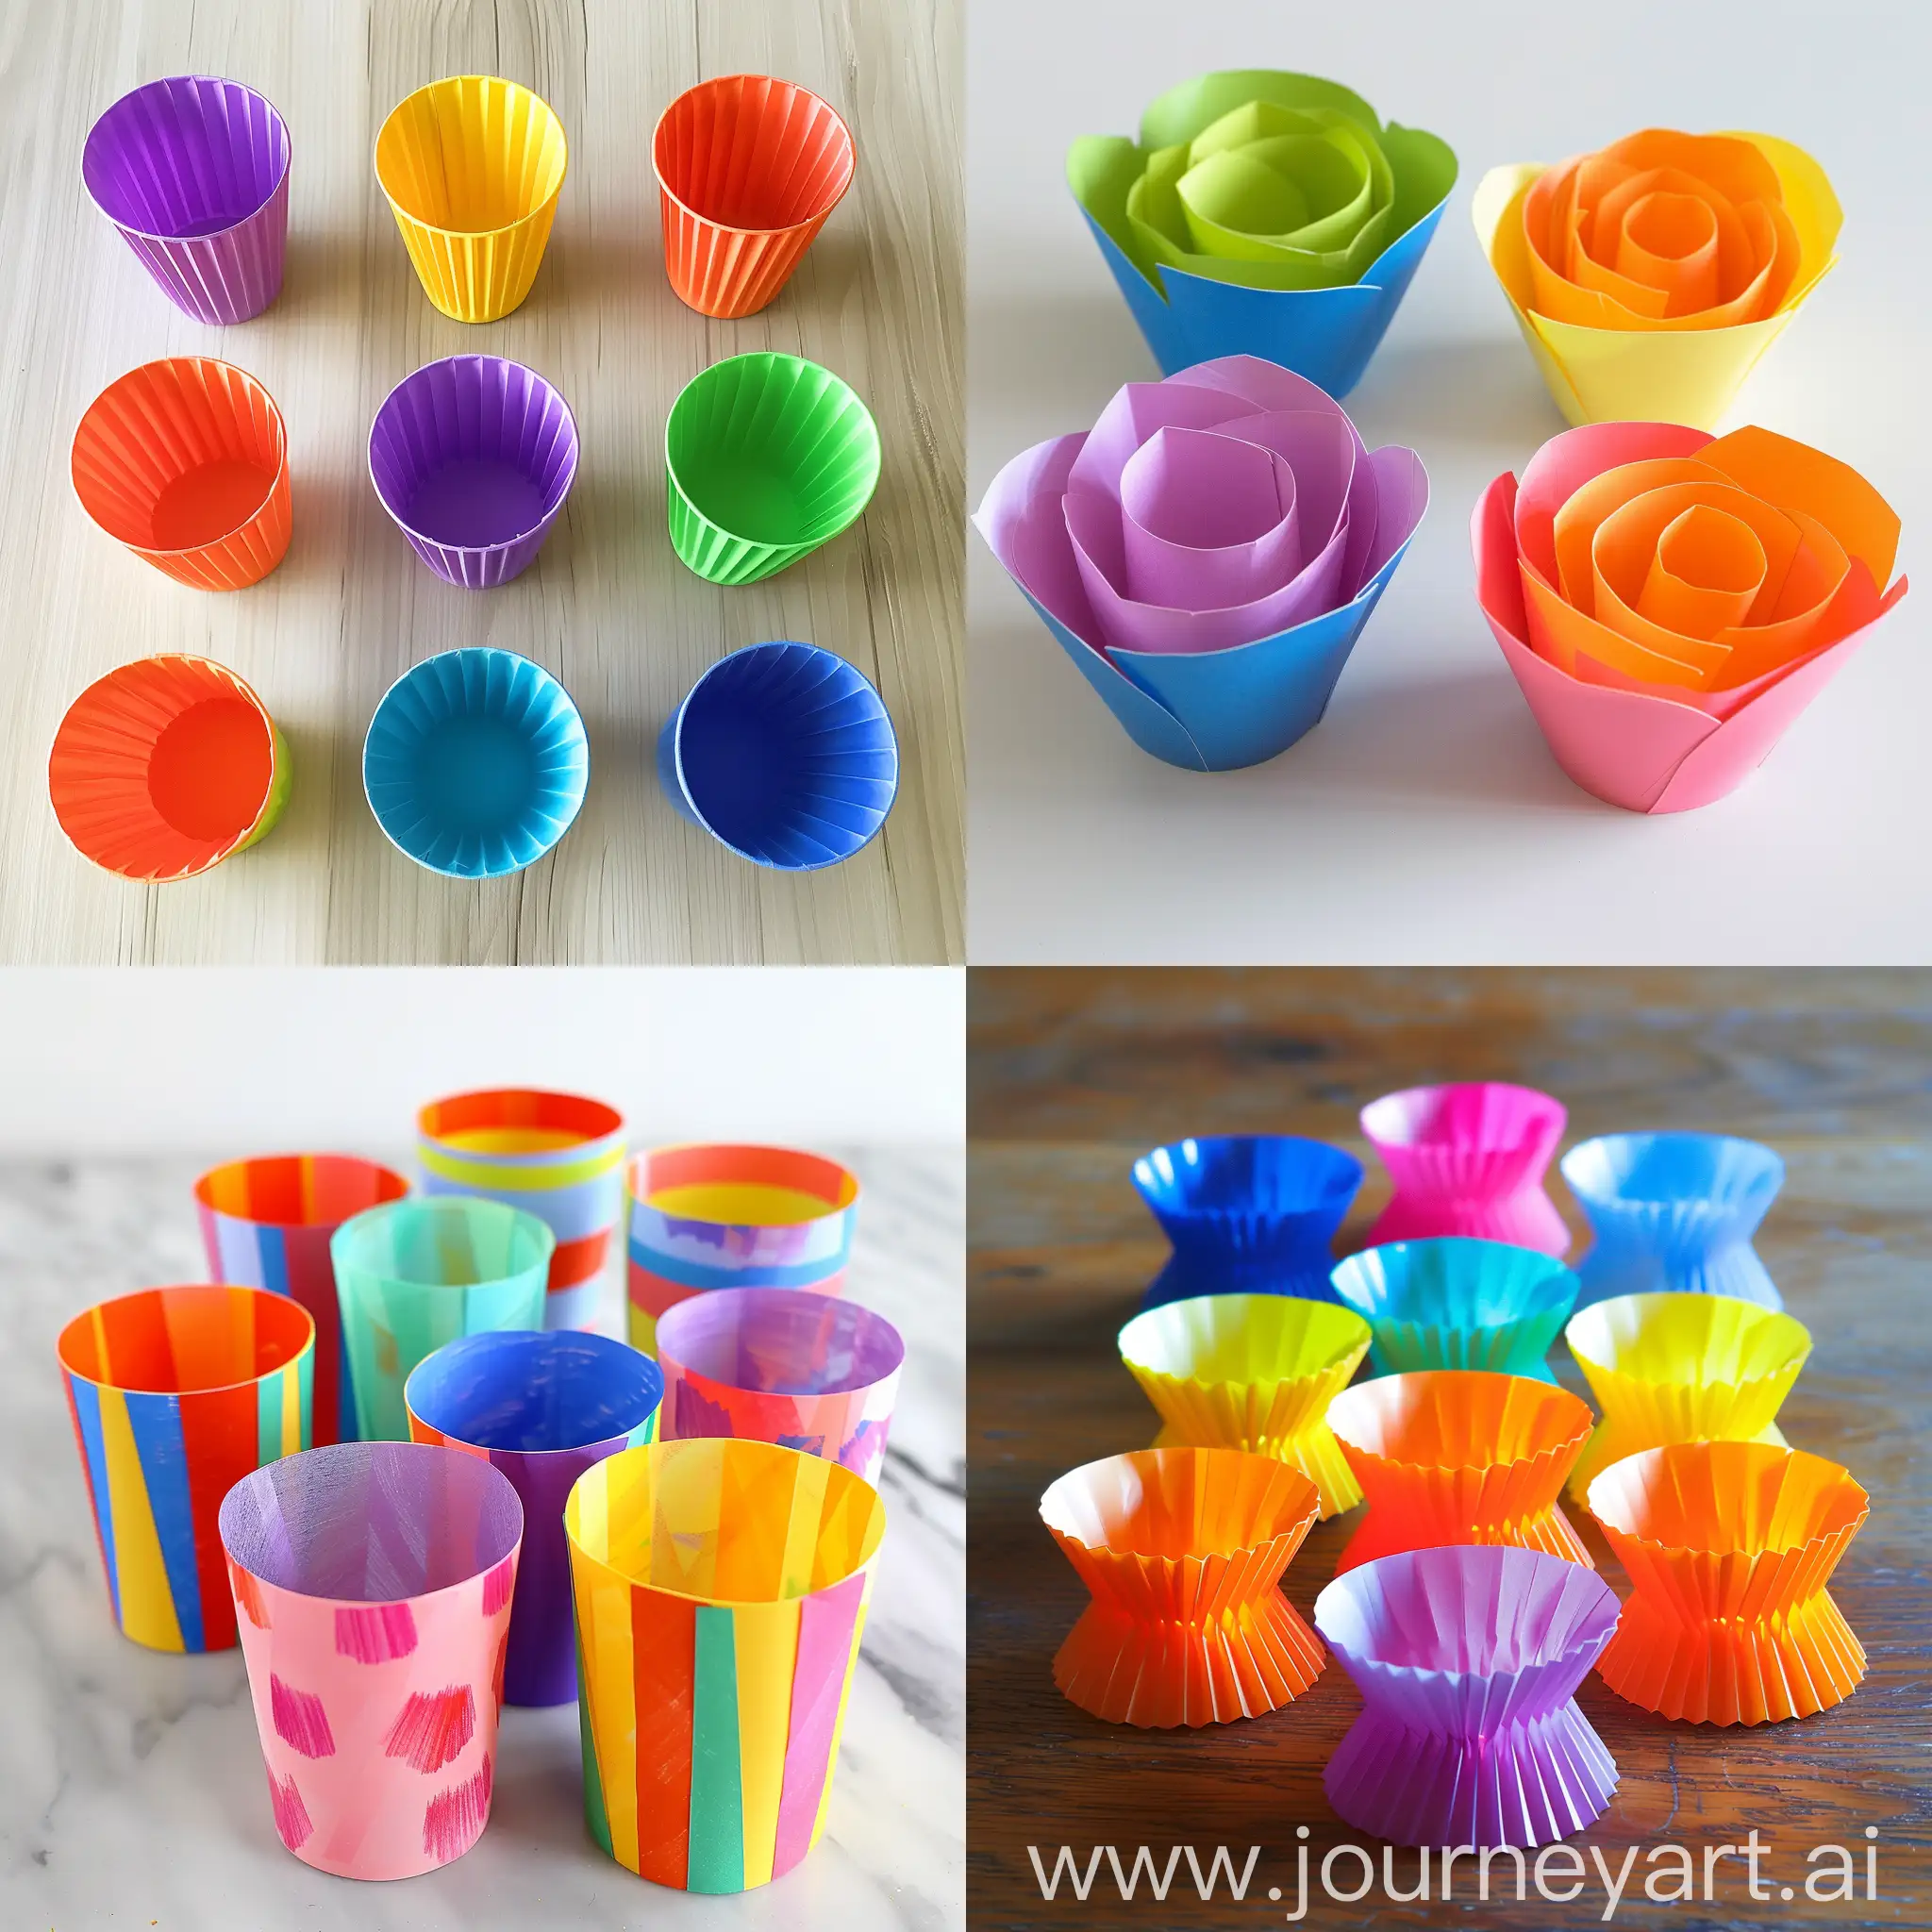 March-8th-Childrens-Craft-Colorful-Paper-and-Plastic-Cup-Creations